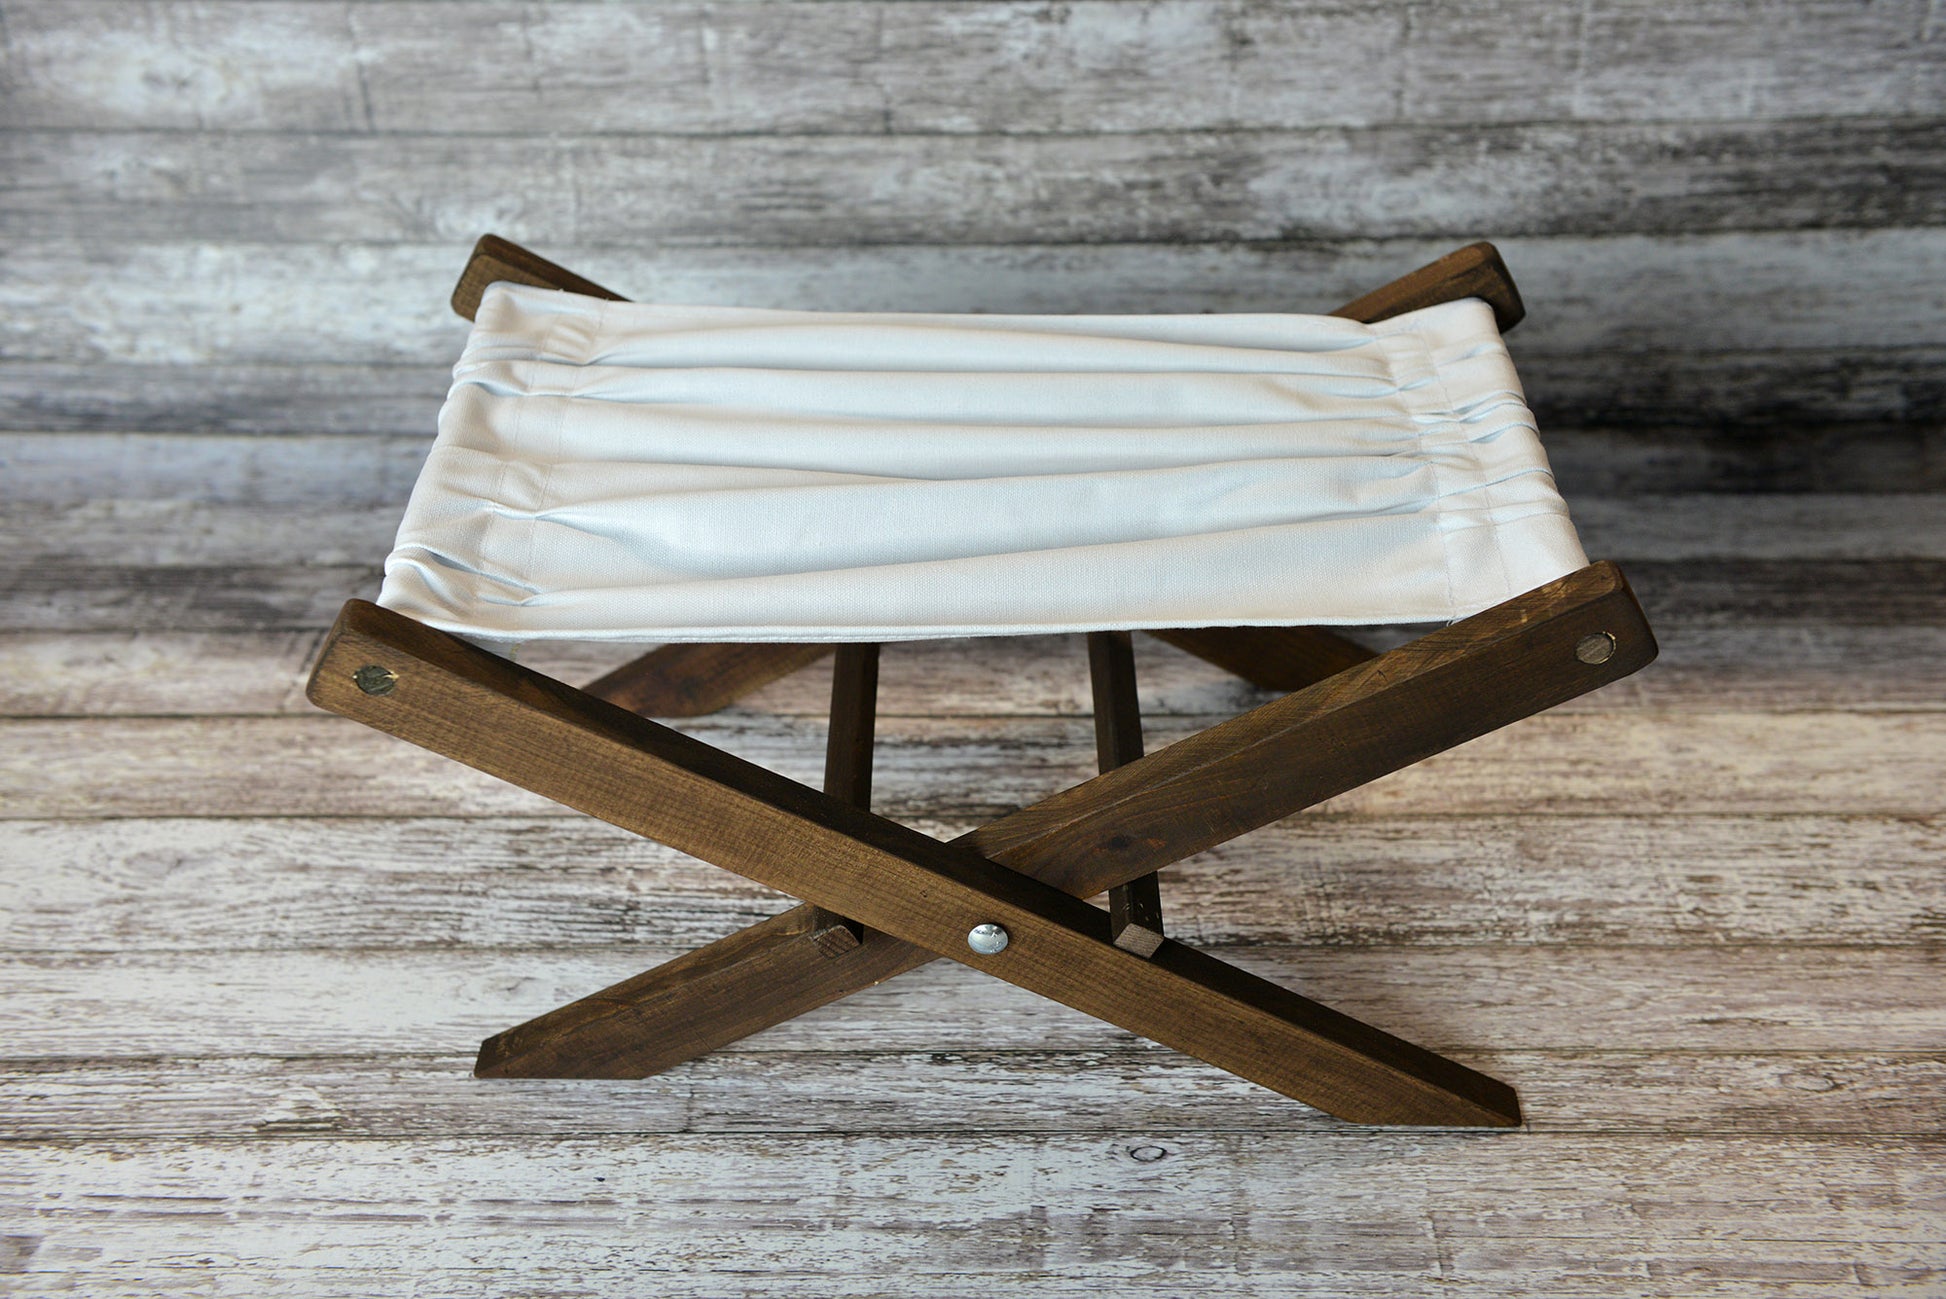 Rustic Deck Chair AND Matching Pillow - White Canvas - Interchangeable-Newborn Photography Props